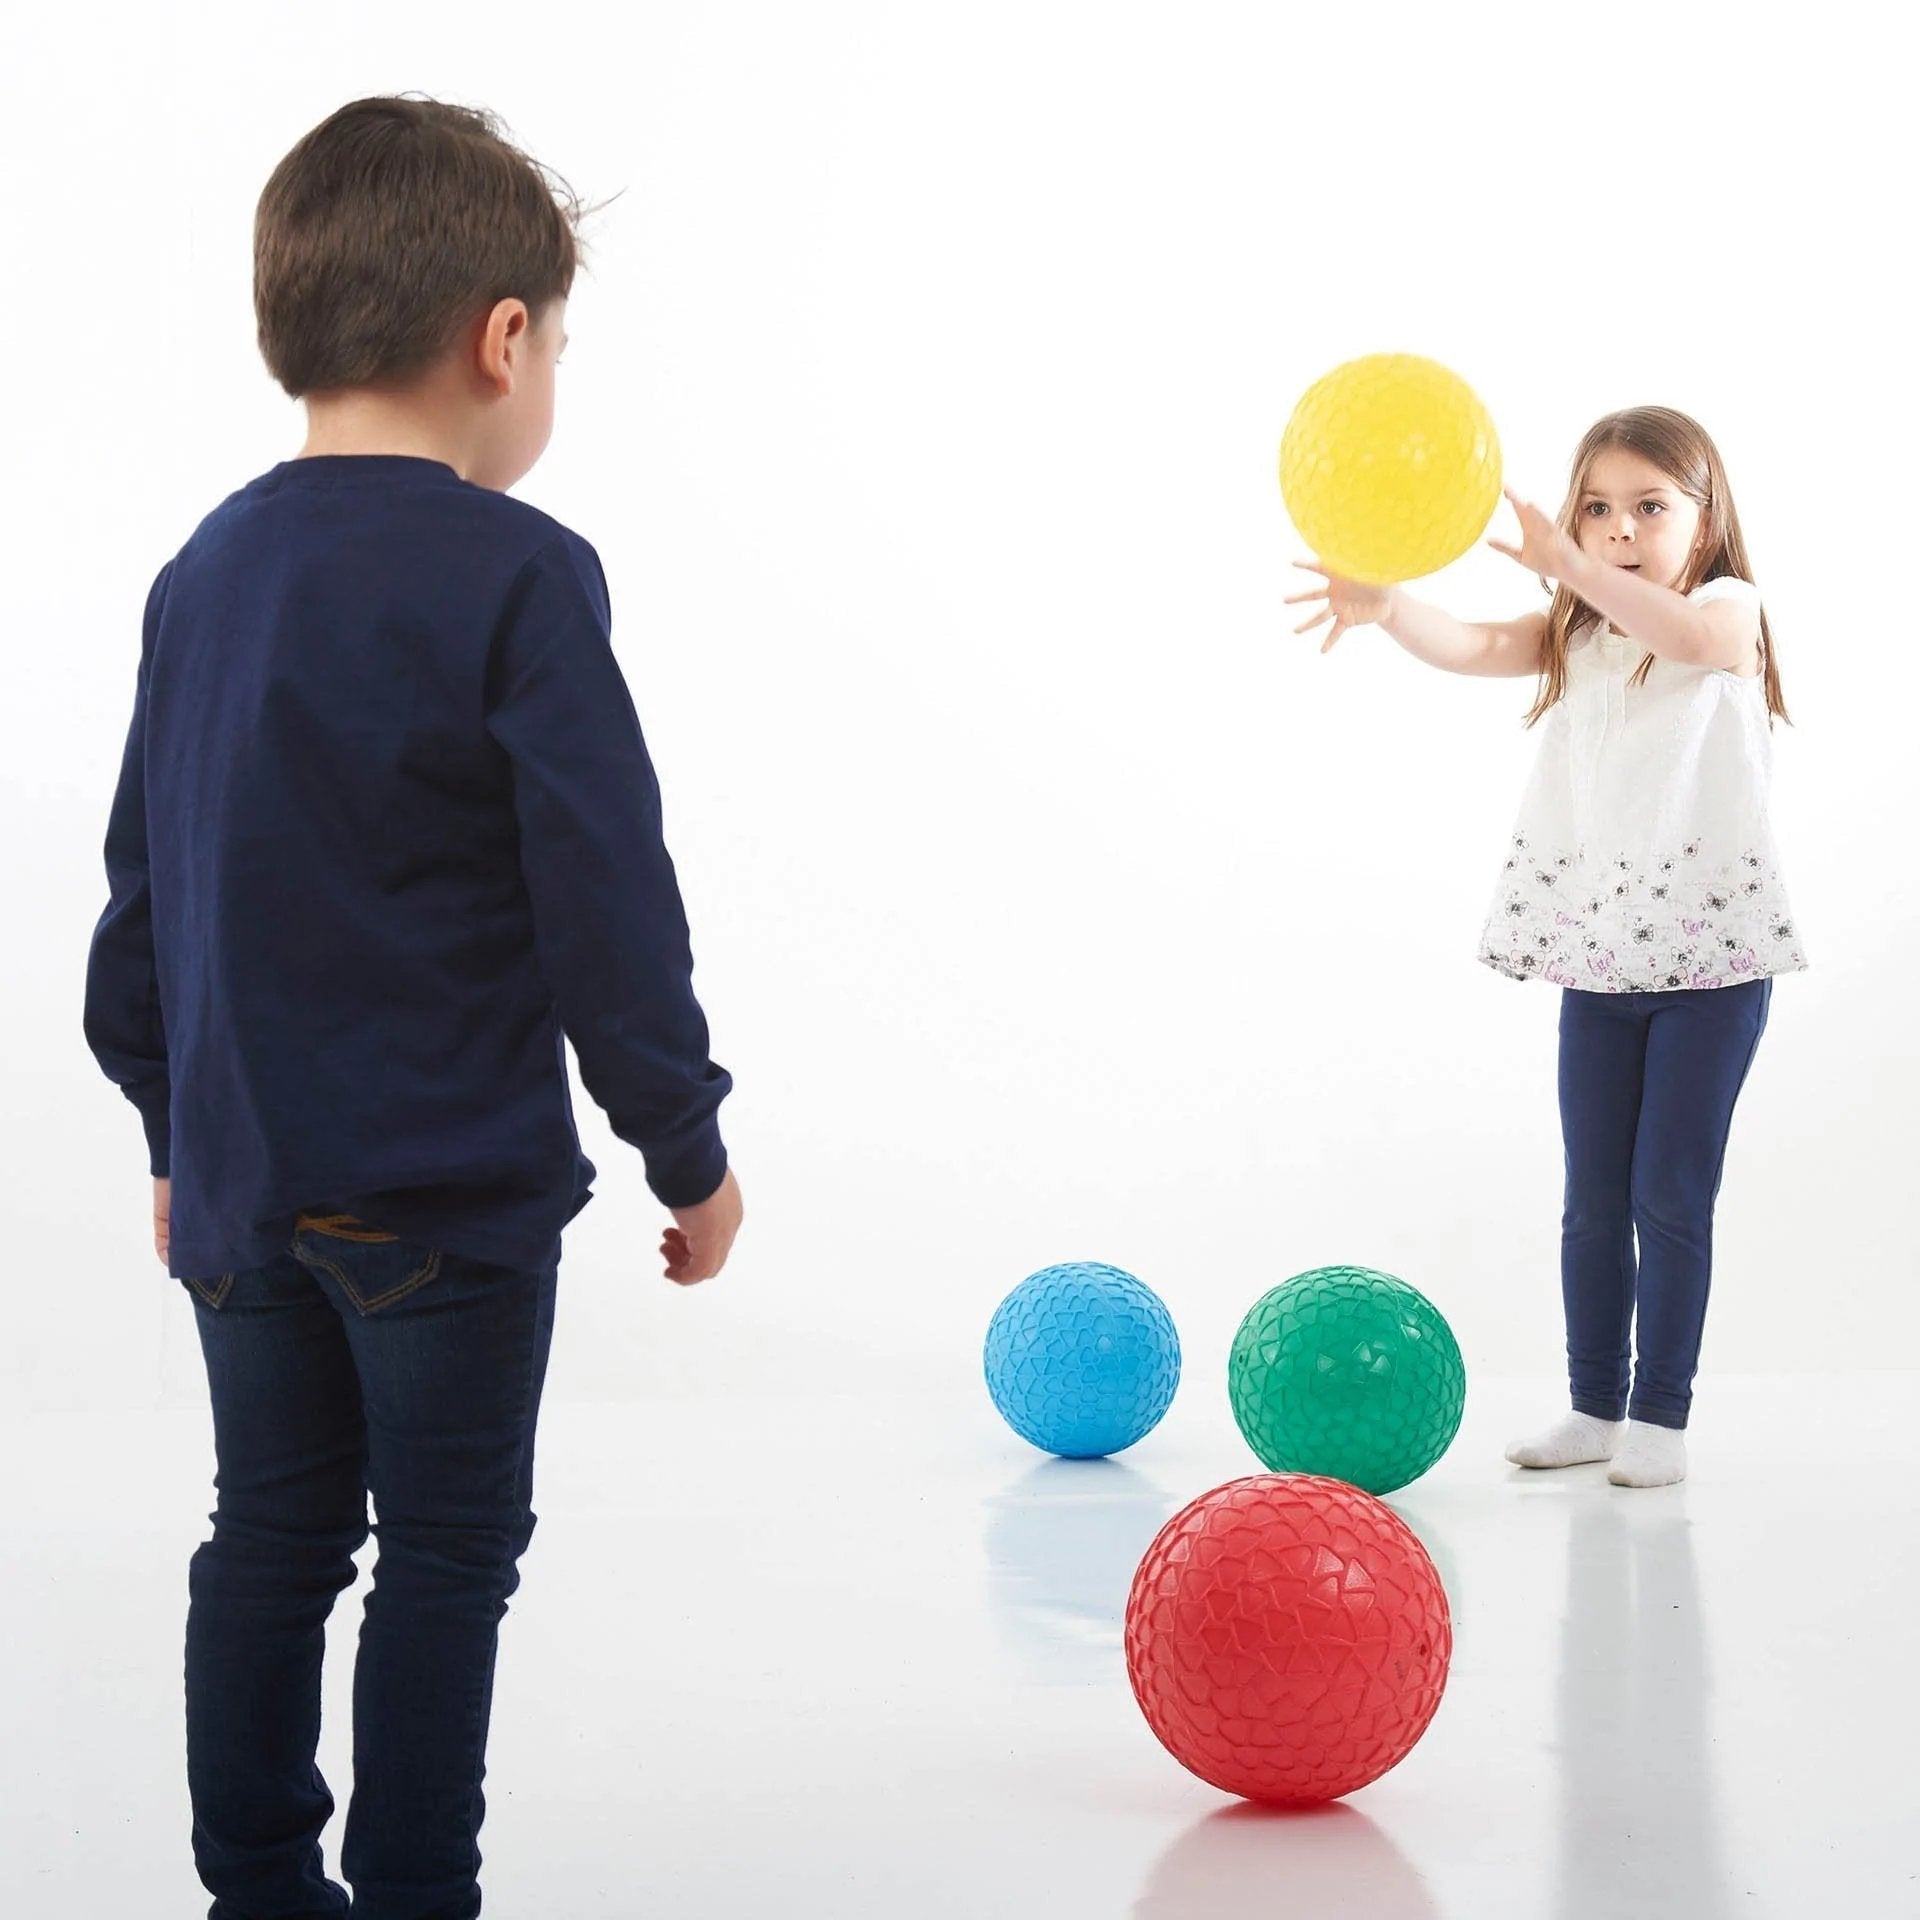 Easy Grip Balls Set - Pk4, The Easy Grip Balls Set is a delightful set of four brightly coloured inflatable Jumbo Easy Grip balls with a honeycomb effect surface which aids grip when catching and throwing. The Easy Grip Balls Set - Pk4 are lightweight but sturdy and a good size for young children to handle.Improves children’s confidence with ball skills and hand-eye coordination.The Easy Grip Balls Set - Pk4 contains ball in Red, green, blue and yellow. Supports the following areas of learning: Physical Dev